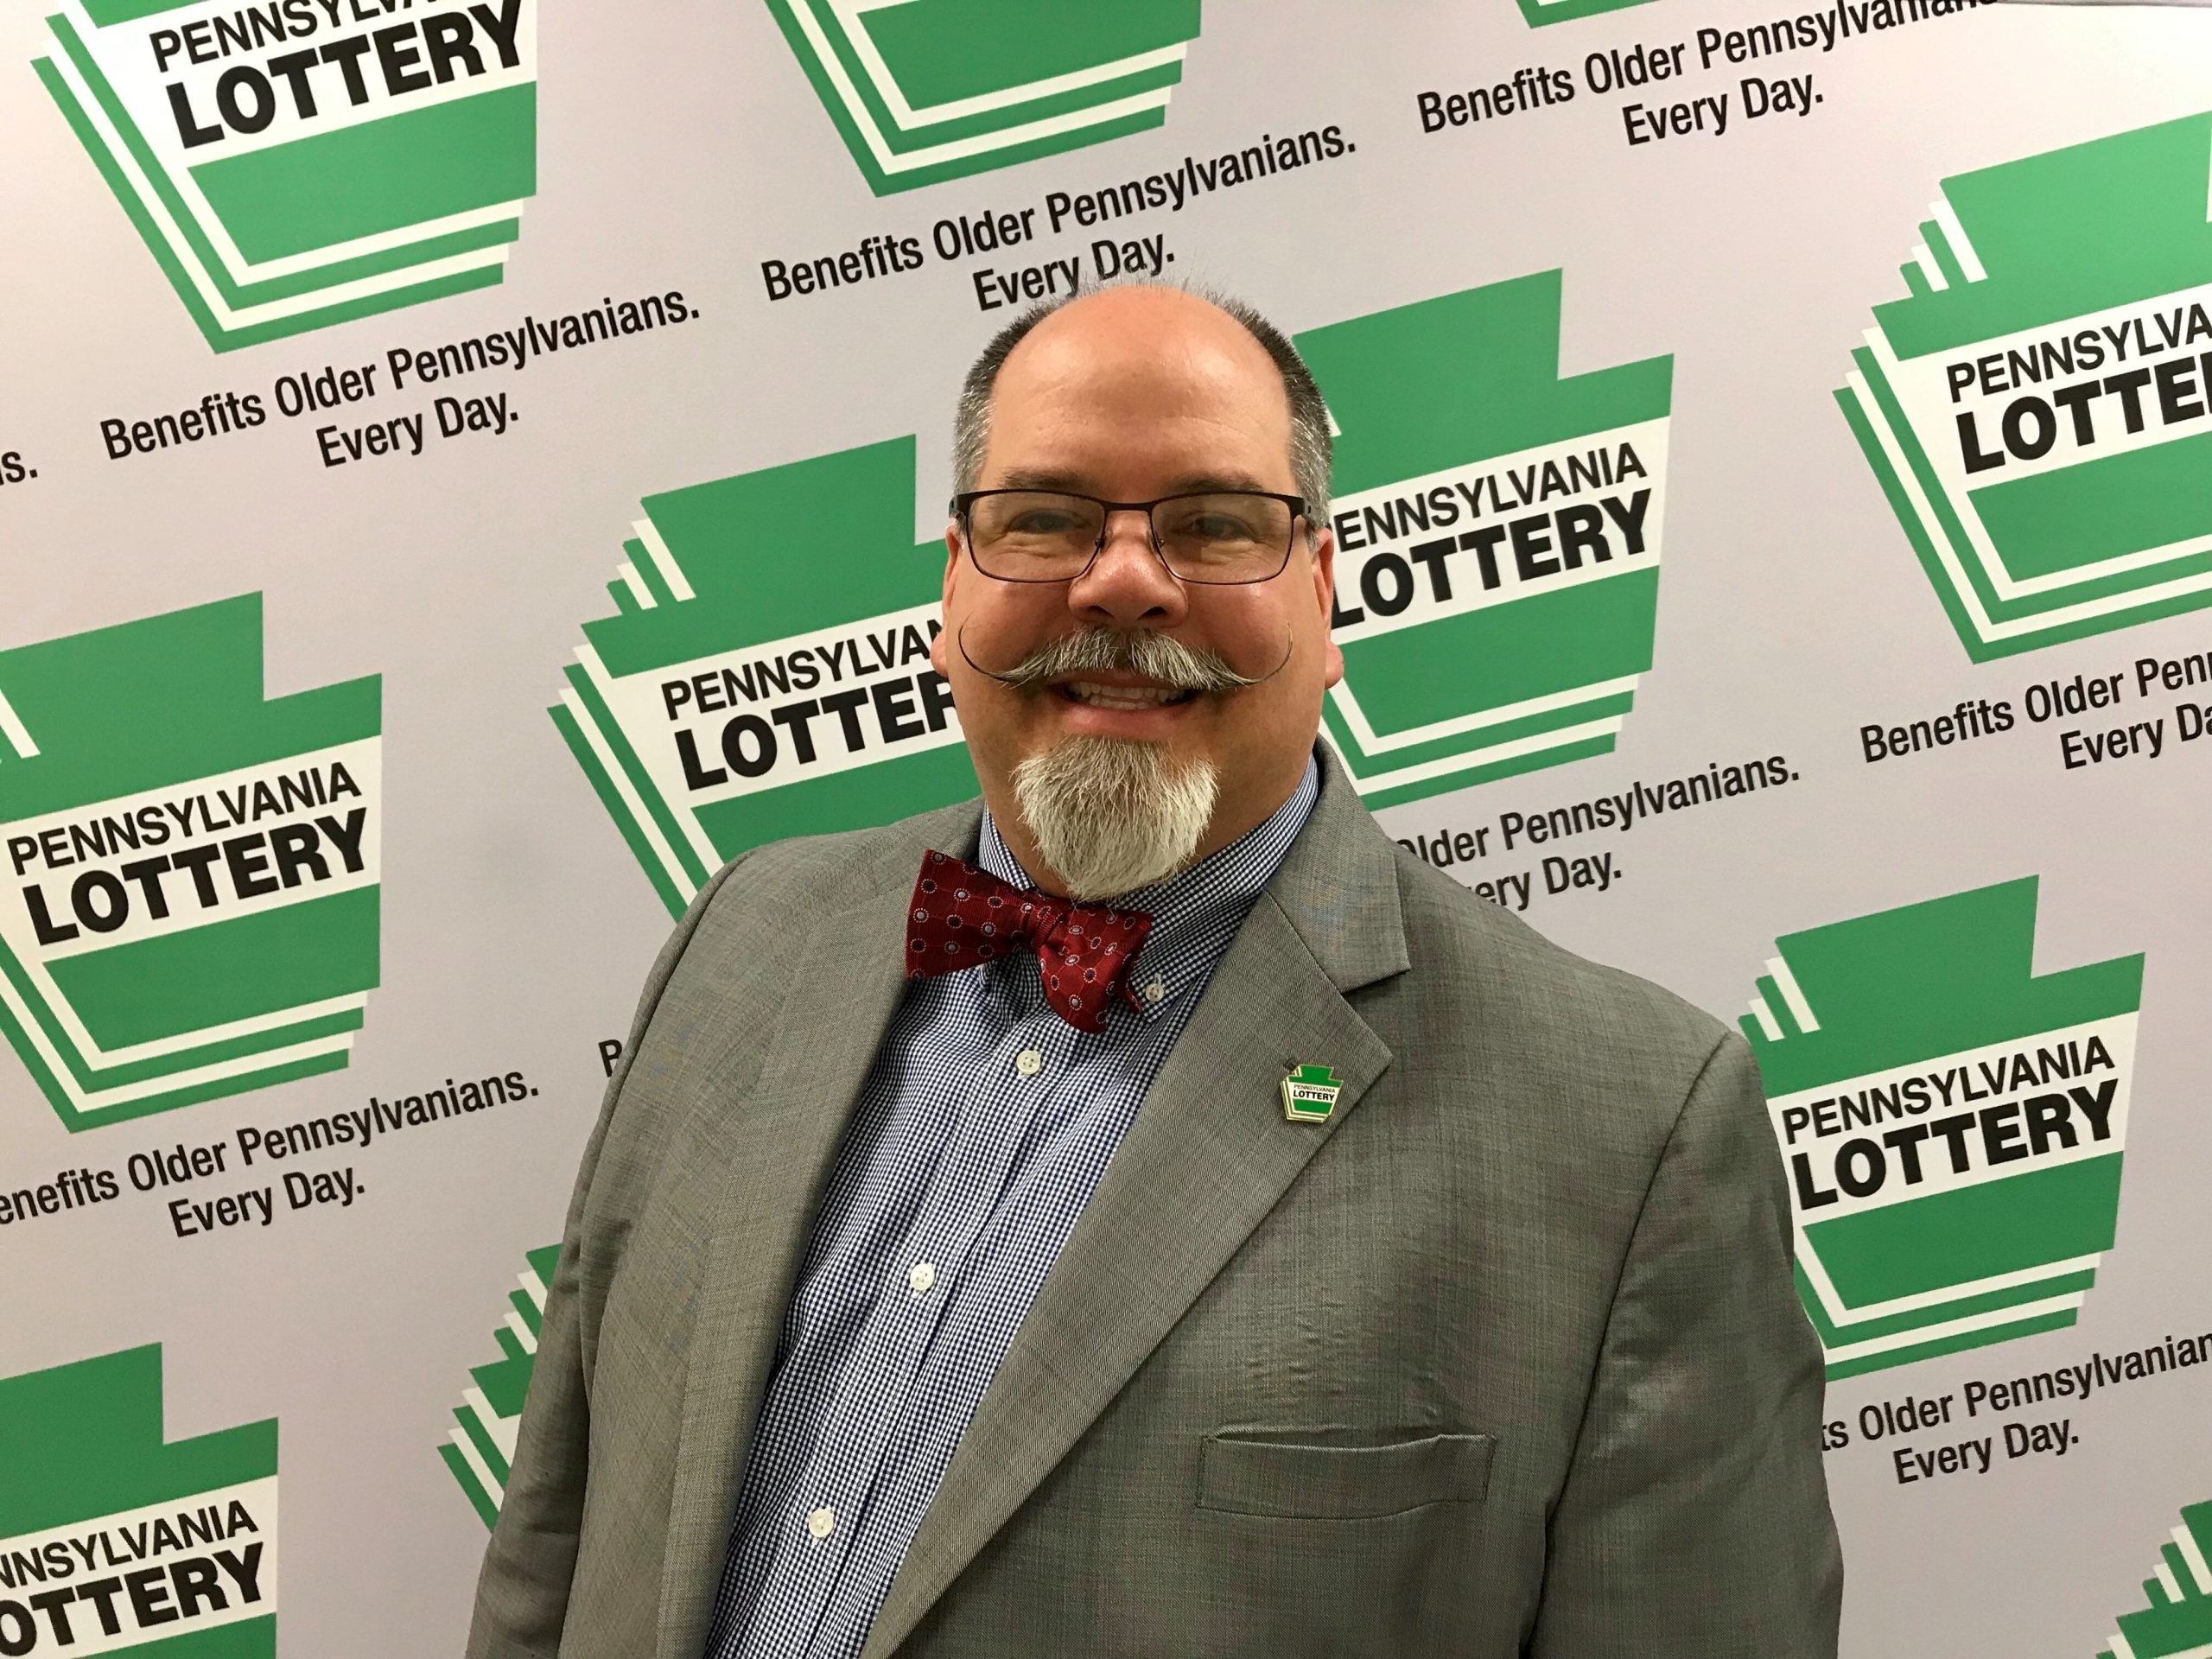 Lottery facing headwinds, sales down - CommonWealth Beacon